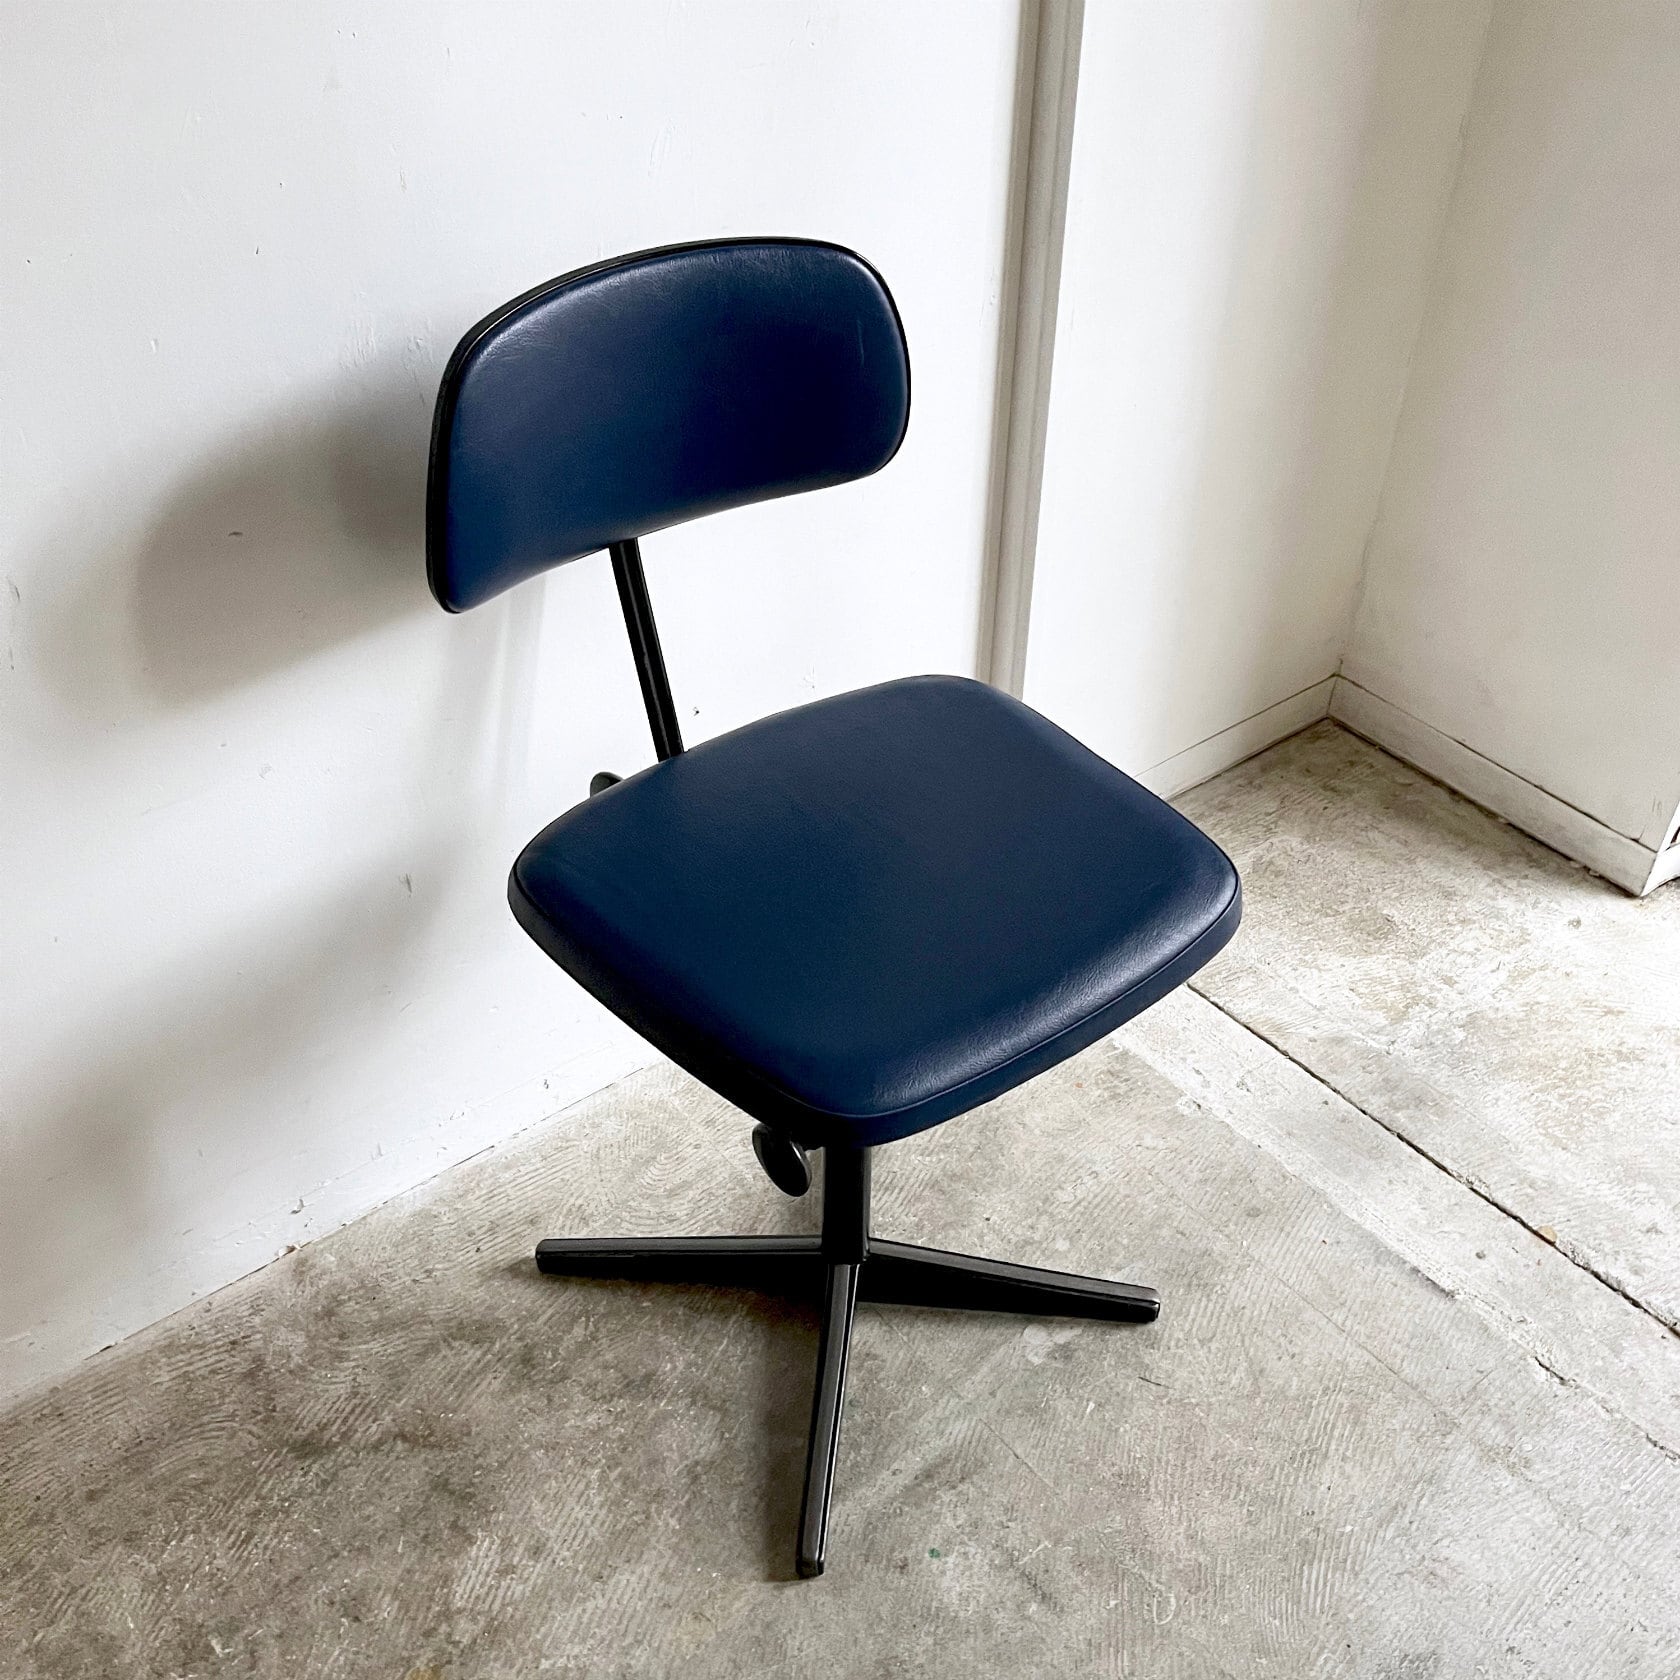 Friso Kramer (フリゾ・クラマー) Design Drafting Chair for Ahrend